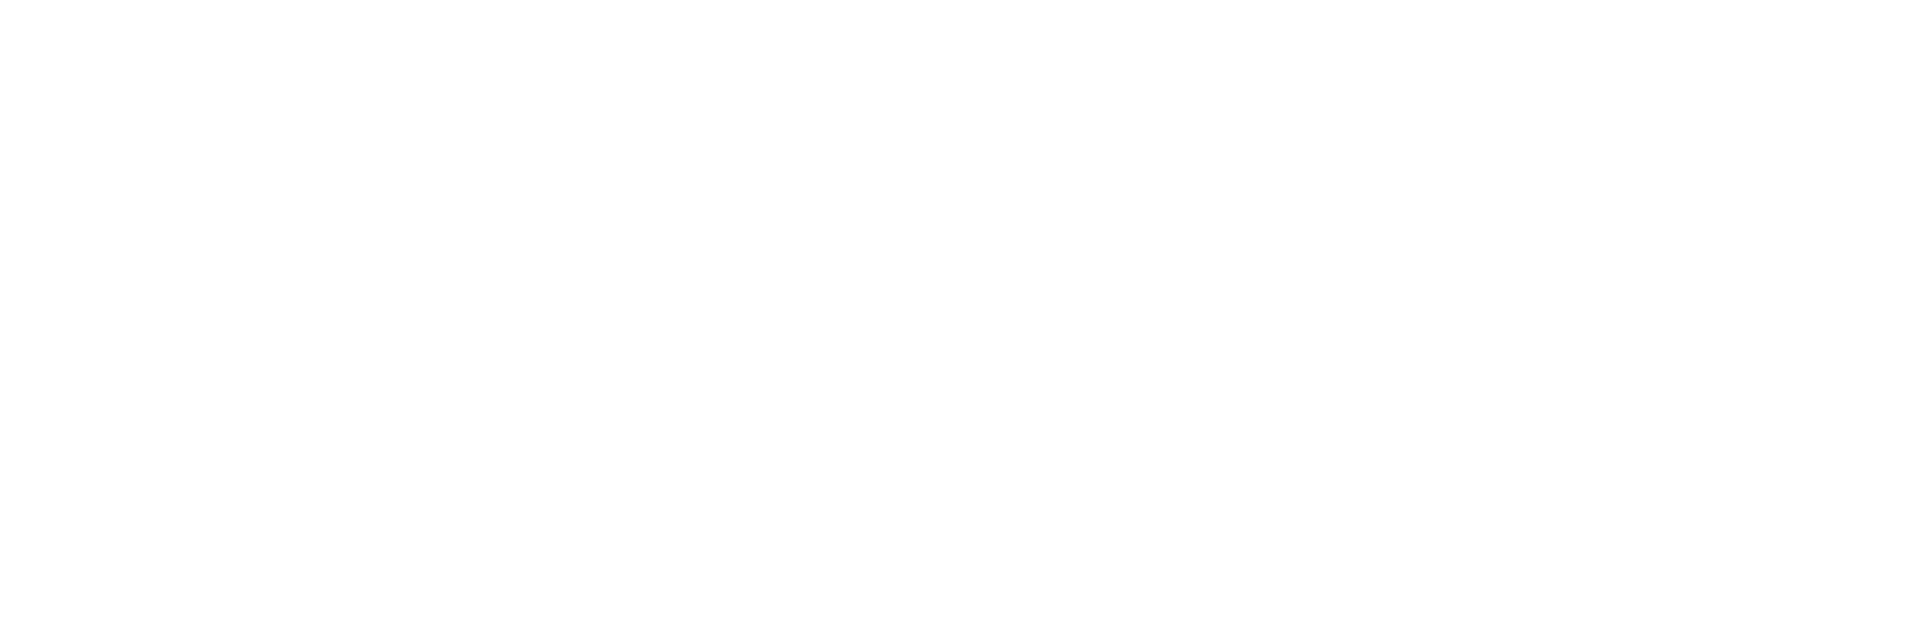 Illustration shows the differences in the tube sets and their connectors between 2022 and 2023 generation.